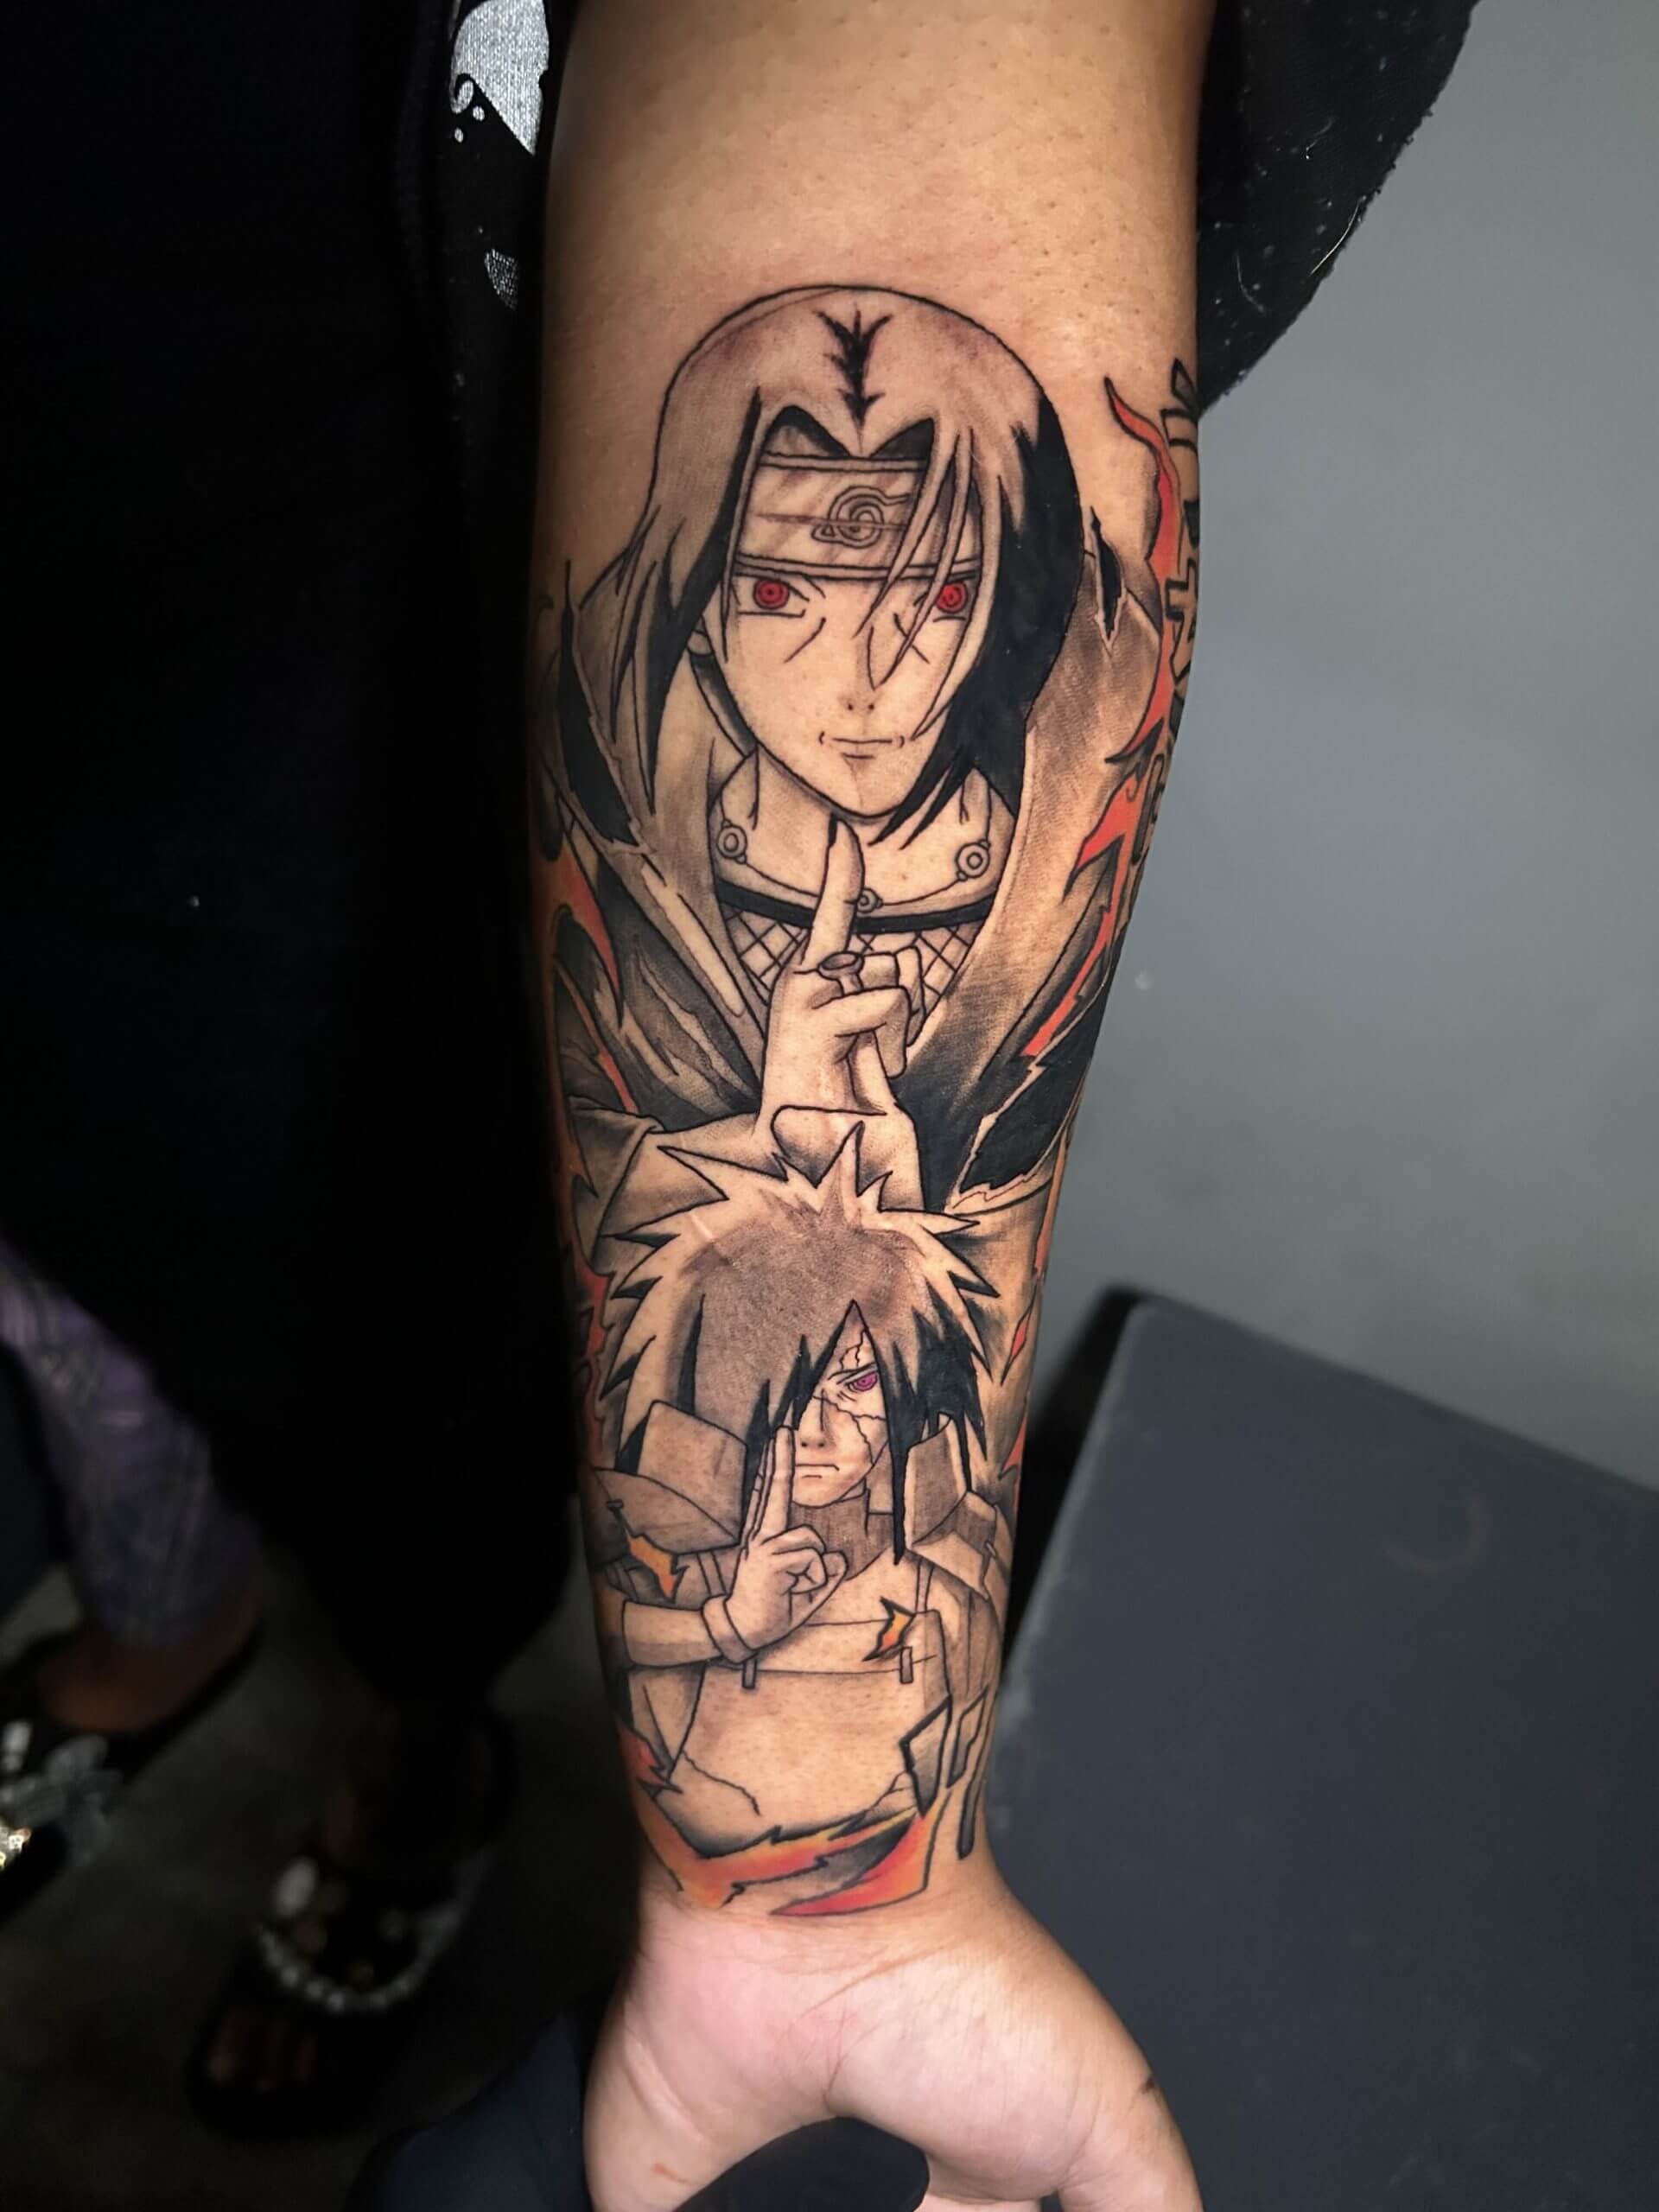 Full Sleeve Naruto & Ju-Jitsu Kaisen anime manga tattoo by Lyric TheArtist at Iron Palm Tattoos In downtown Atlanta Georgia. Naruto and Ju-Jitsu Kaisen are both famously popular Javanese animations. Ju-Jitsu Kaisen is a Japanese manga series written and illustrated by Gege Akutami. The series follows the story of Yuji Itadori, a high school student who becomes a Jujutsu Sorcerer Naruto is a Japanese manga series written and illustrated by Masashi Kishimoto. The series follows the story of Naruto Uzumaki, a young ninja who dreams of becoming the most powerful and respected ninja in his village. Lyric's designs have become a city favorite for Anime tattoos in Atlanta. Call 404-973-7828 or stop by for a free consultation with Lyric. We're open late night til 2AM and walk-ins are welcome.